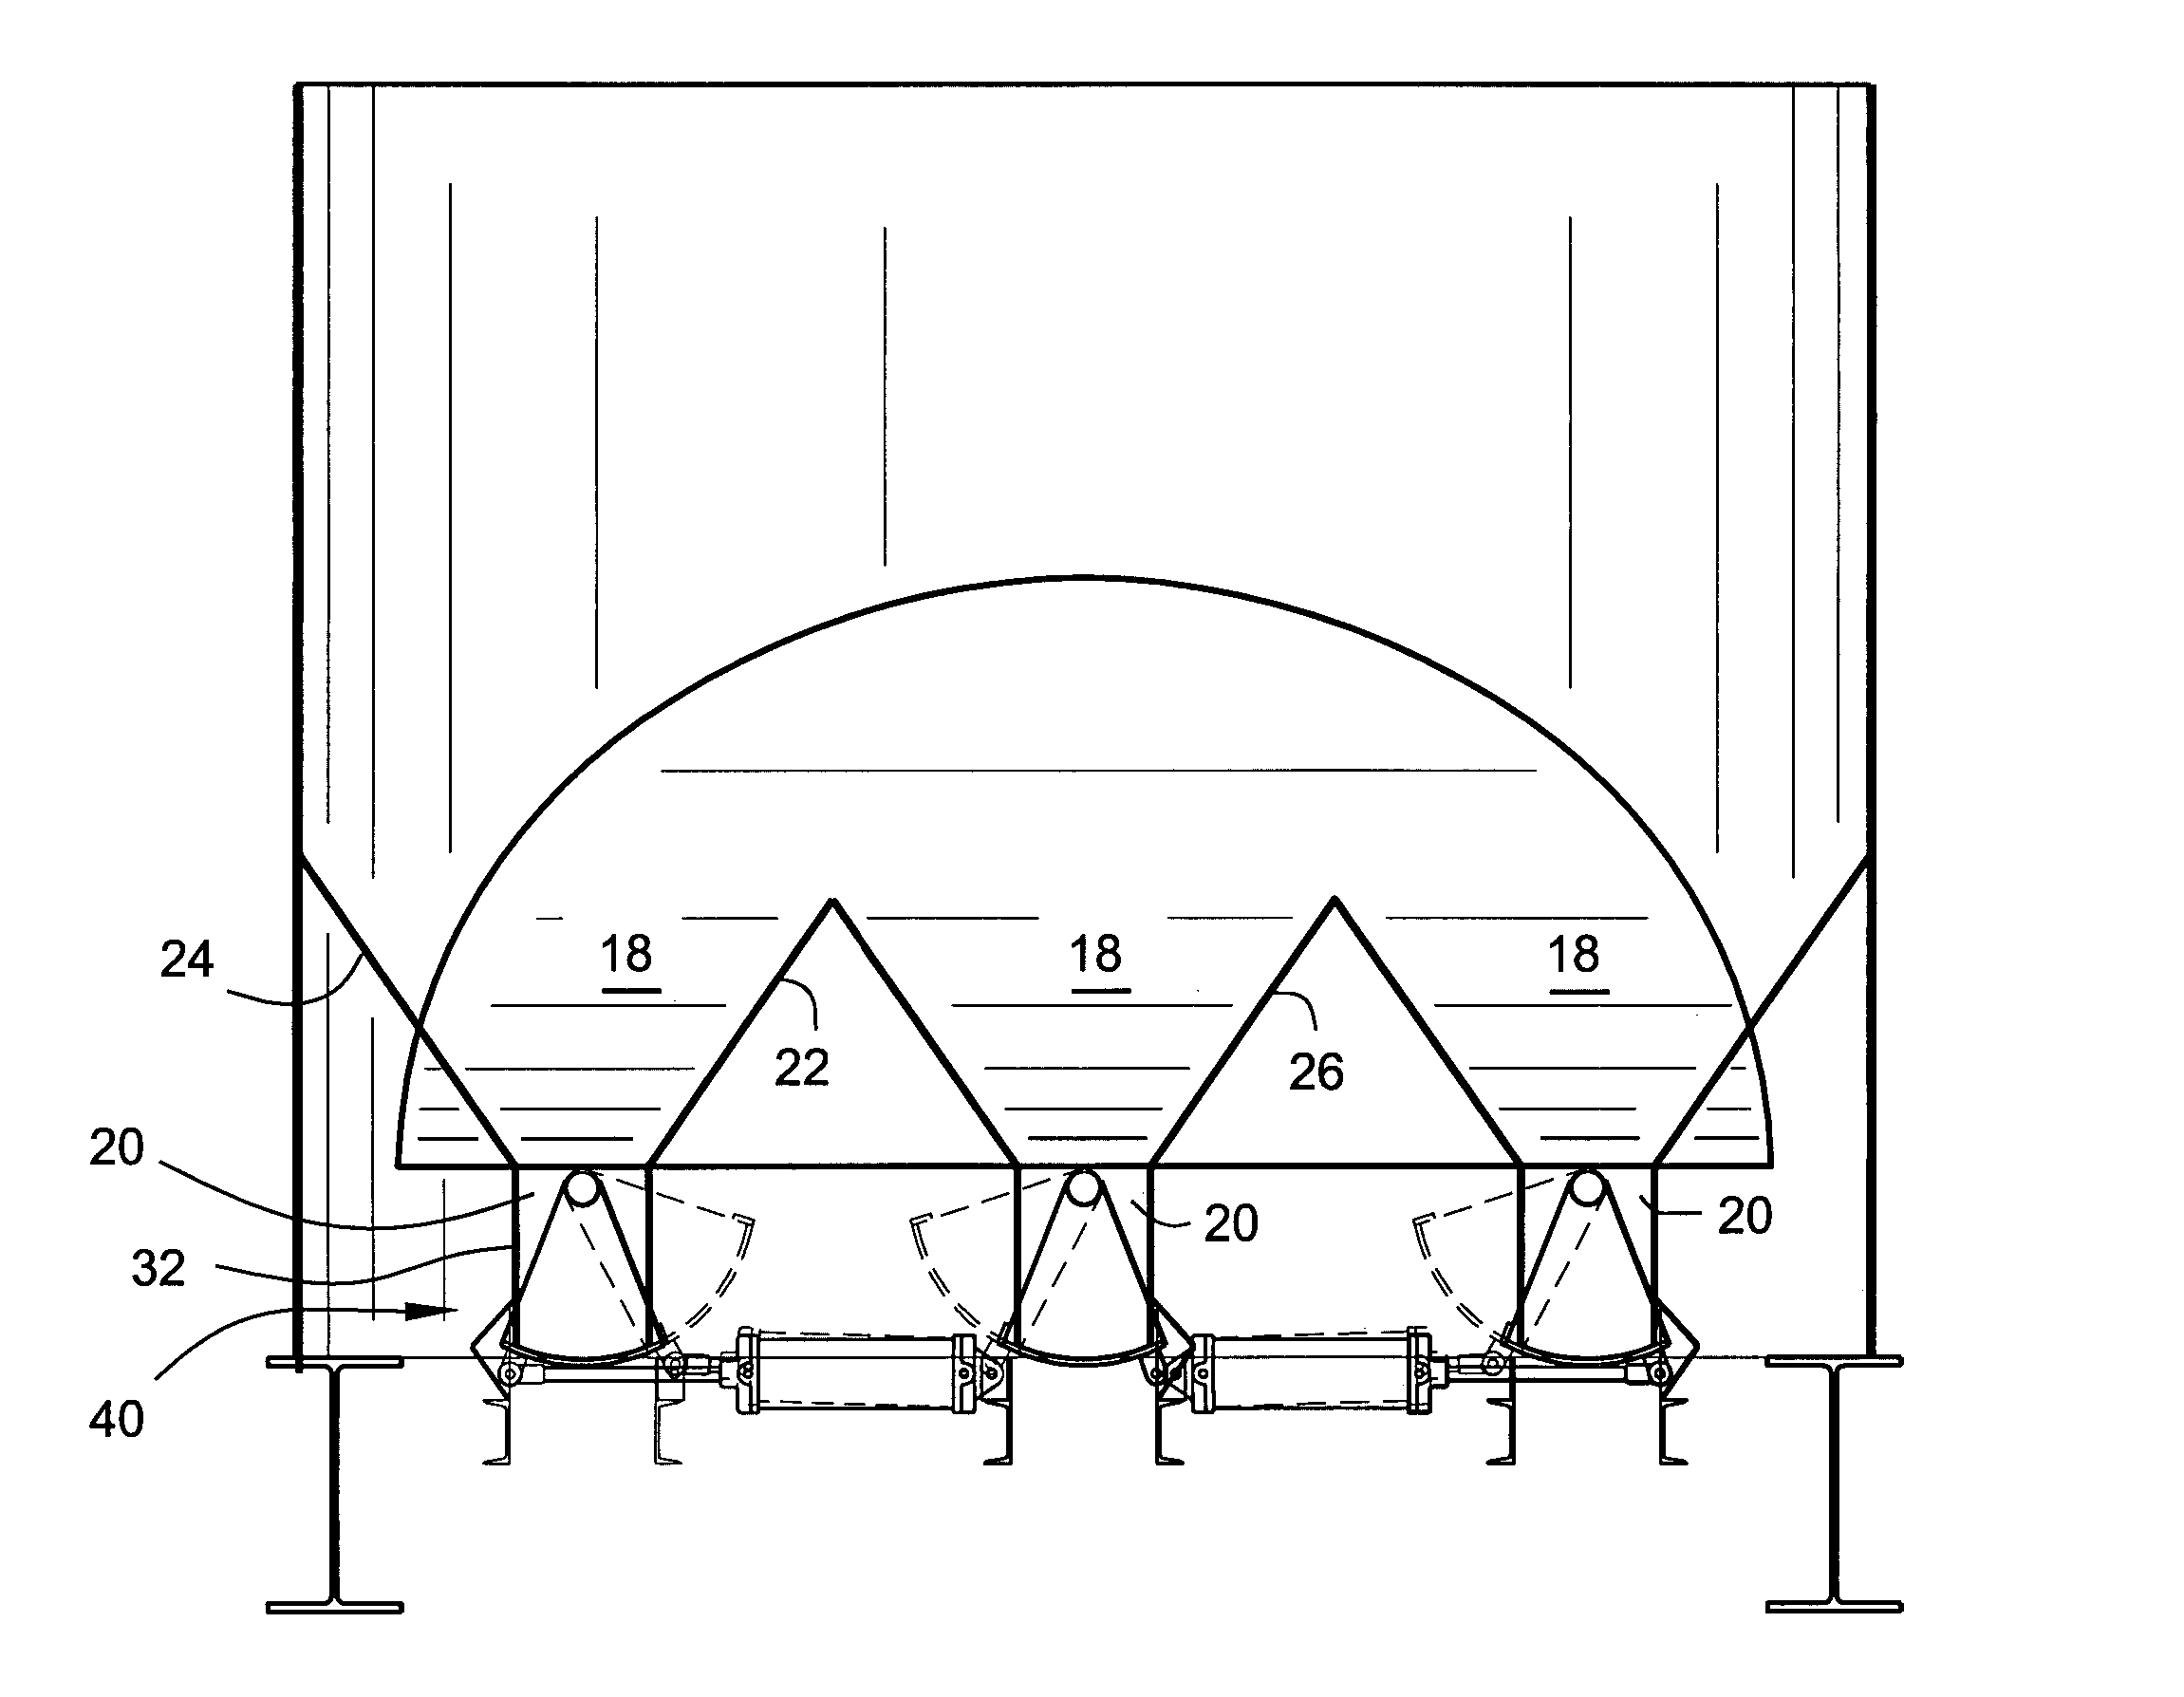 Apparatus and methods for discharging particulate material from storage silos